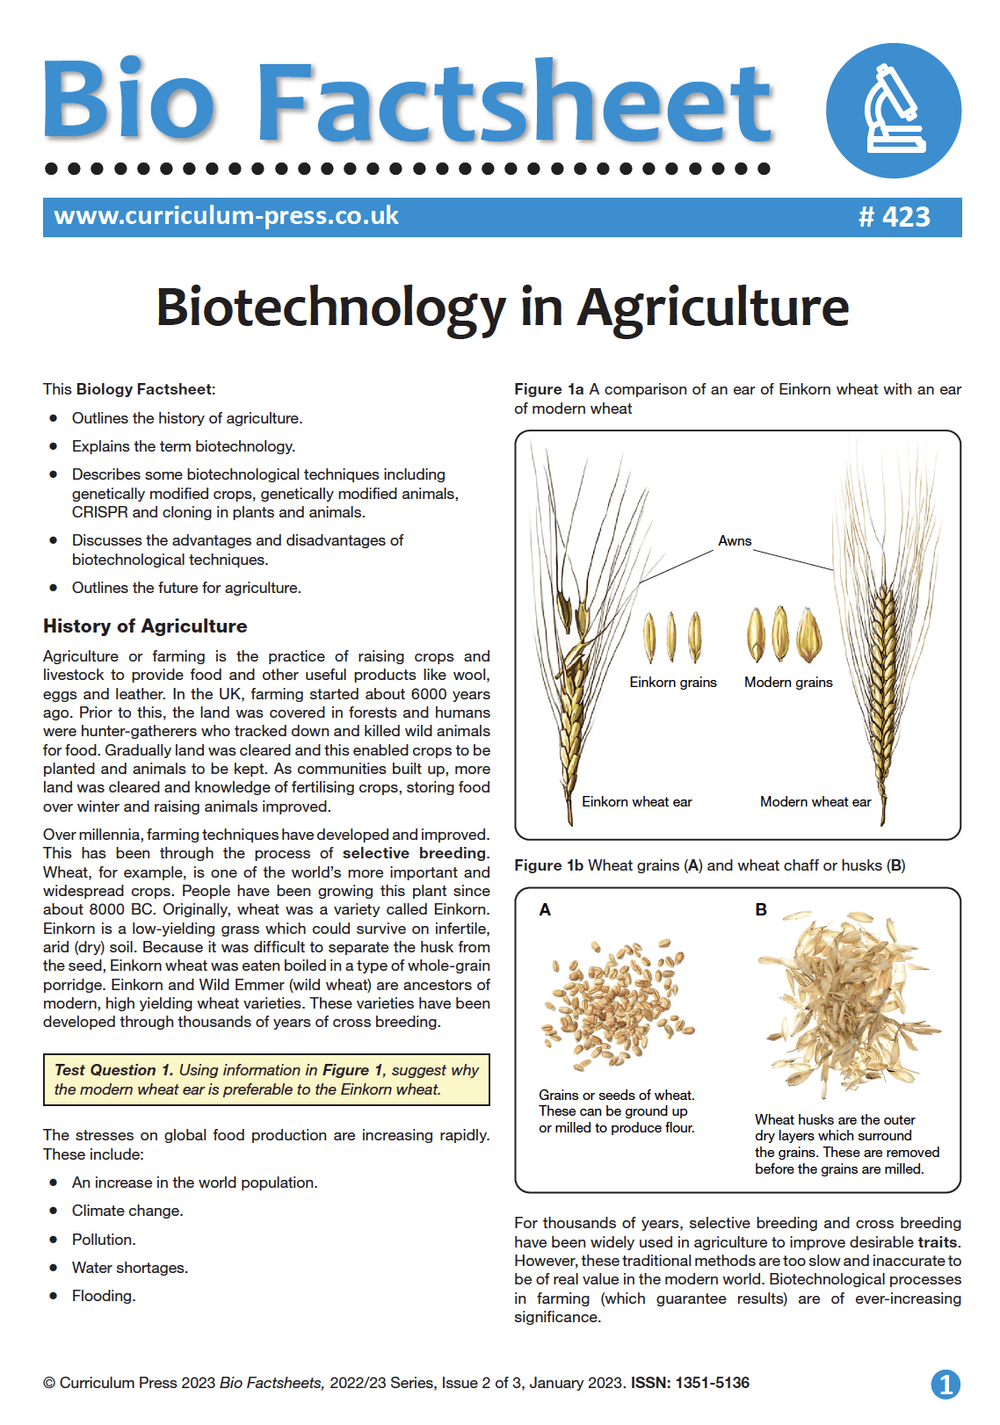 Biotechnology in Agriculture - Curriculum Press